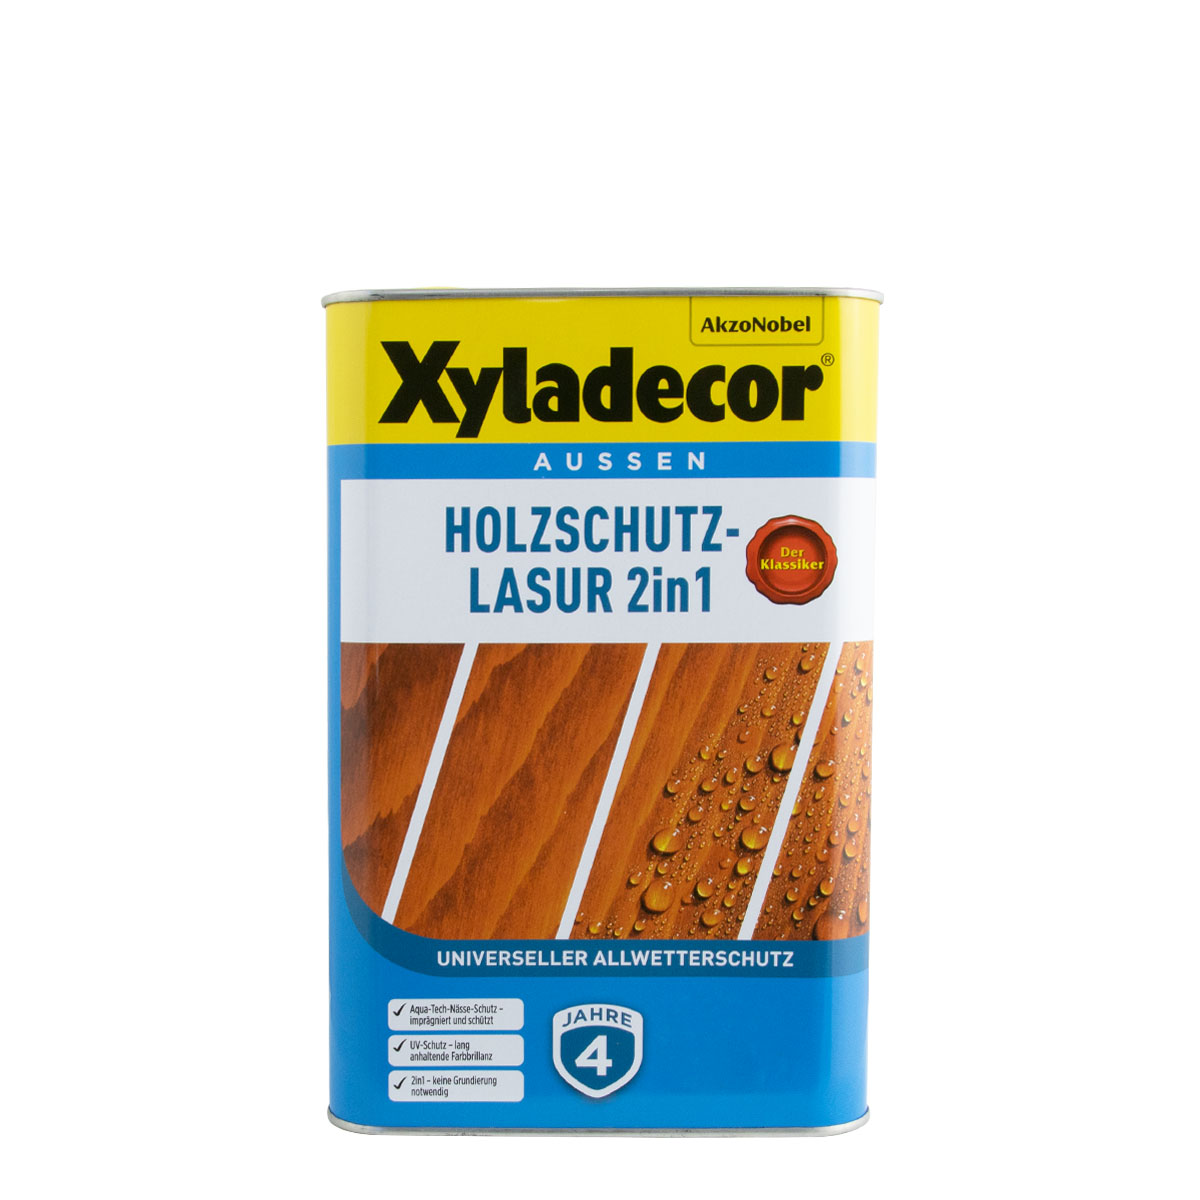 Xyladecor_holzschutz-lasur_2in1_4L_gross